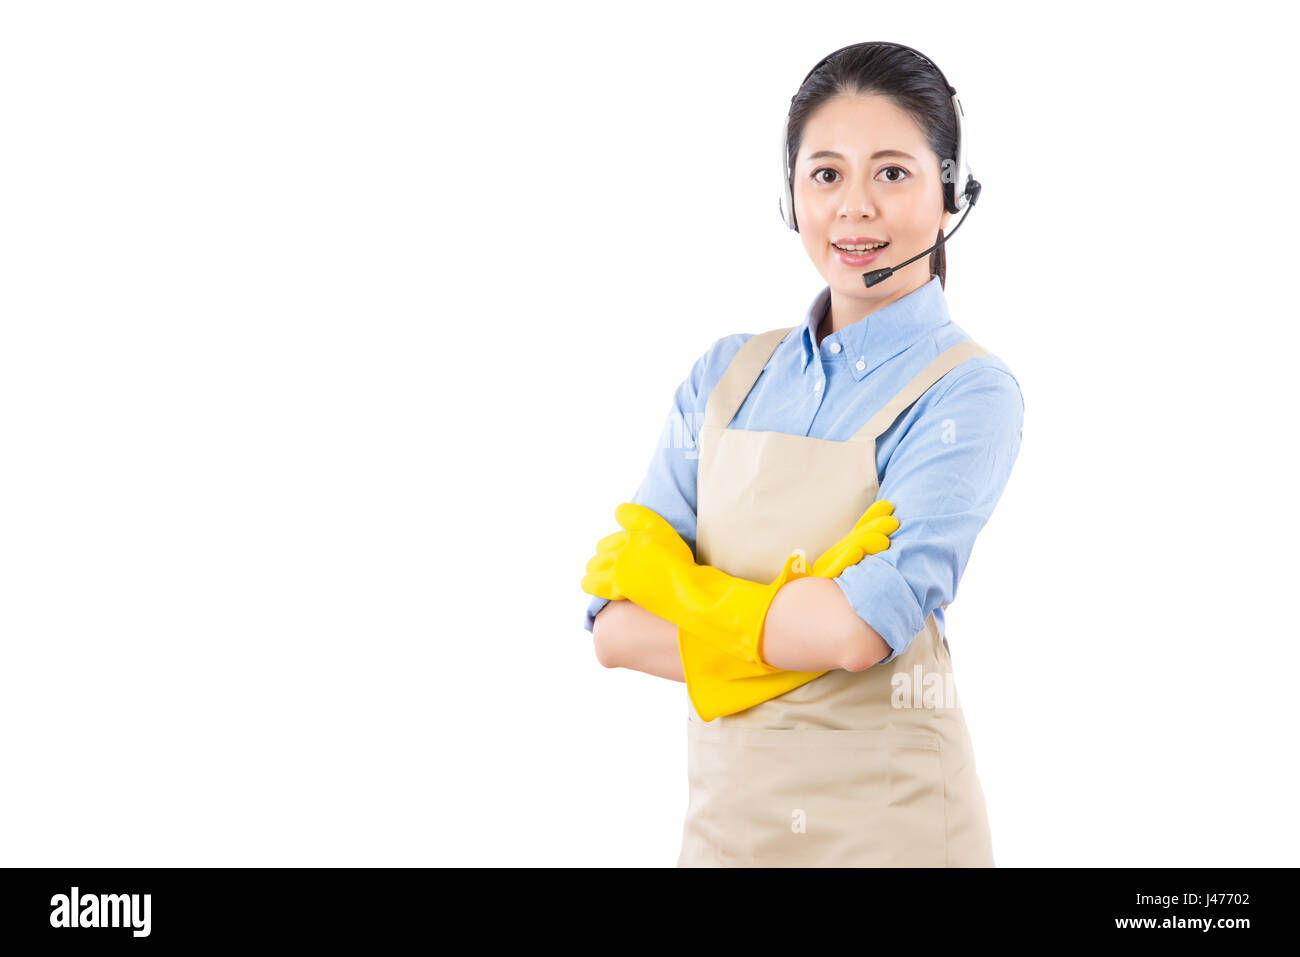 professional house cleaning business woman online services using headset microphone. isolated on white background. mixed race asian chinese model. Stock Photo